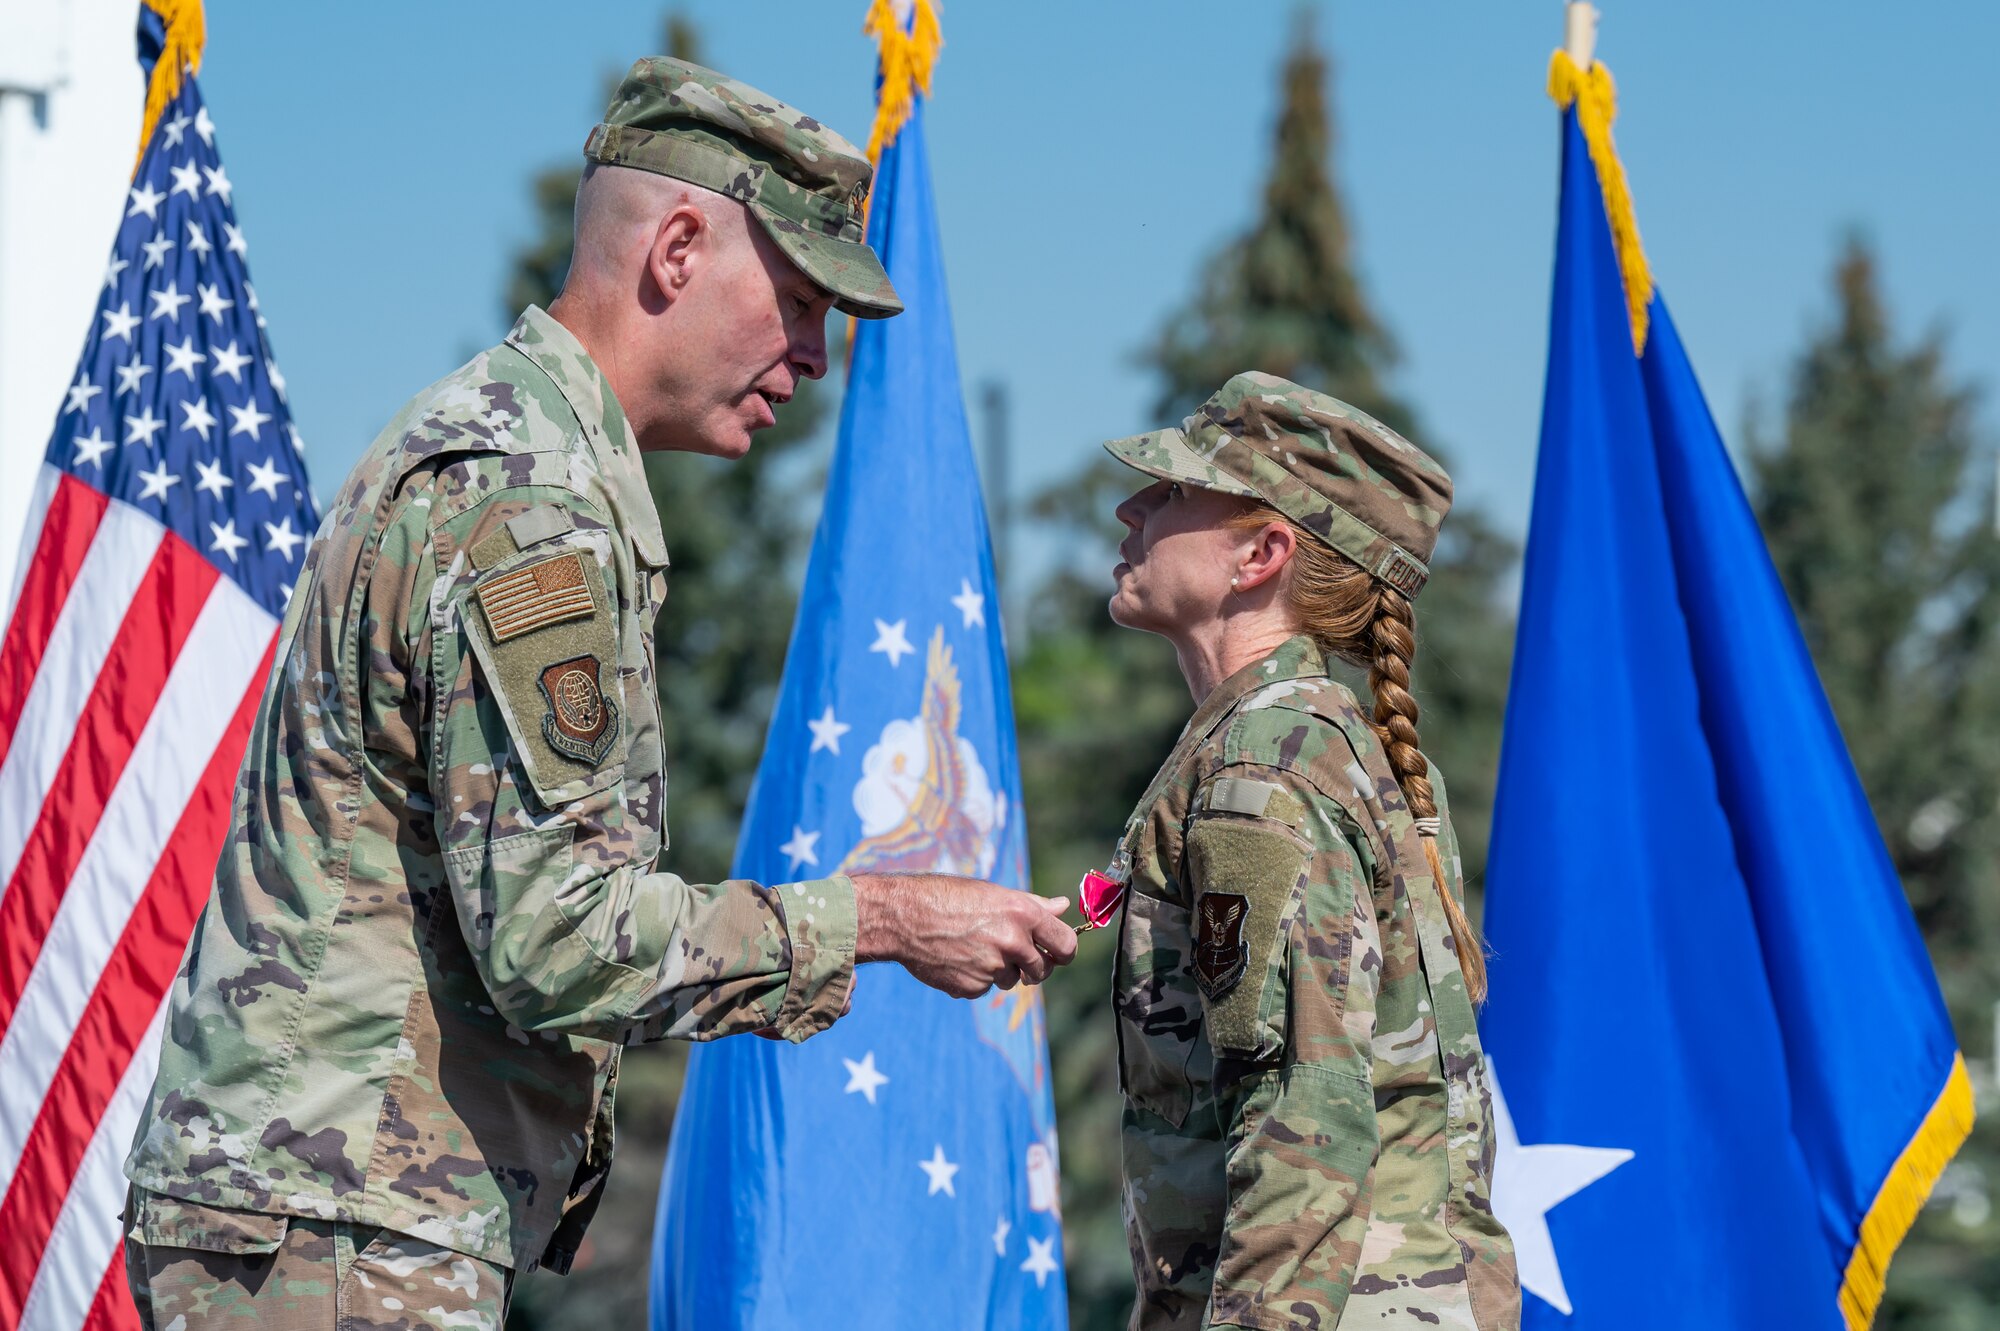 Maj. Gen. Michael Lutton, left, 20th Air Force commander, pins a Legion of Merit medal onto the lapel of Col. Anita Feugate Opperman, right, 341st Missile Wing outgoing commander, during a change of command ceremony July 18, 2022, at Malmstrom Air Force Base, Mont.